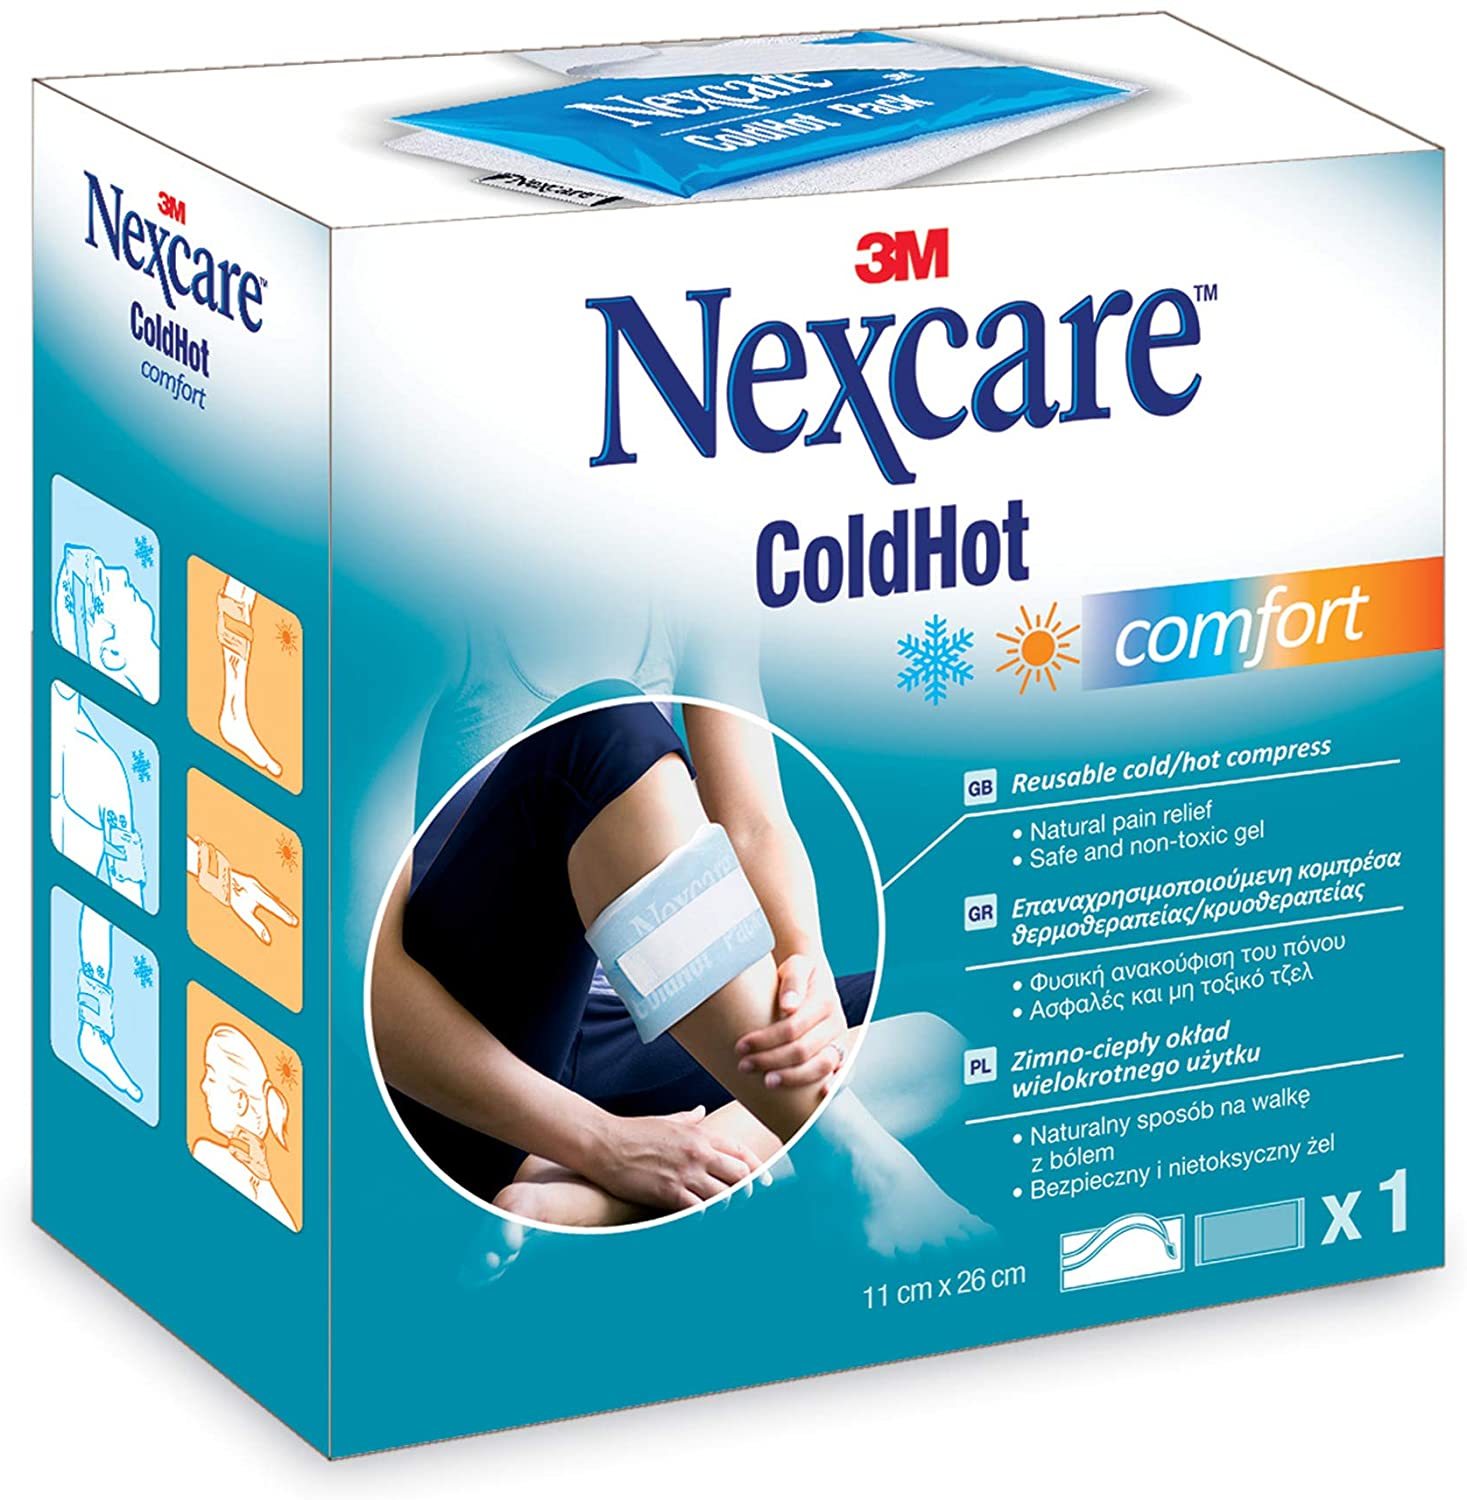 3m Nexcare Coldhot Therapy Pack Maxi 30x19,5cm